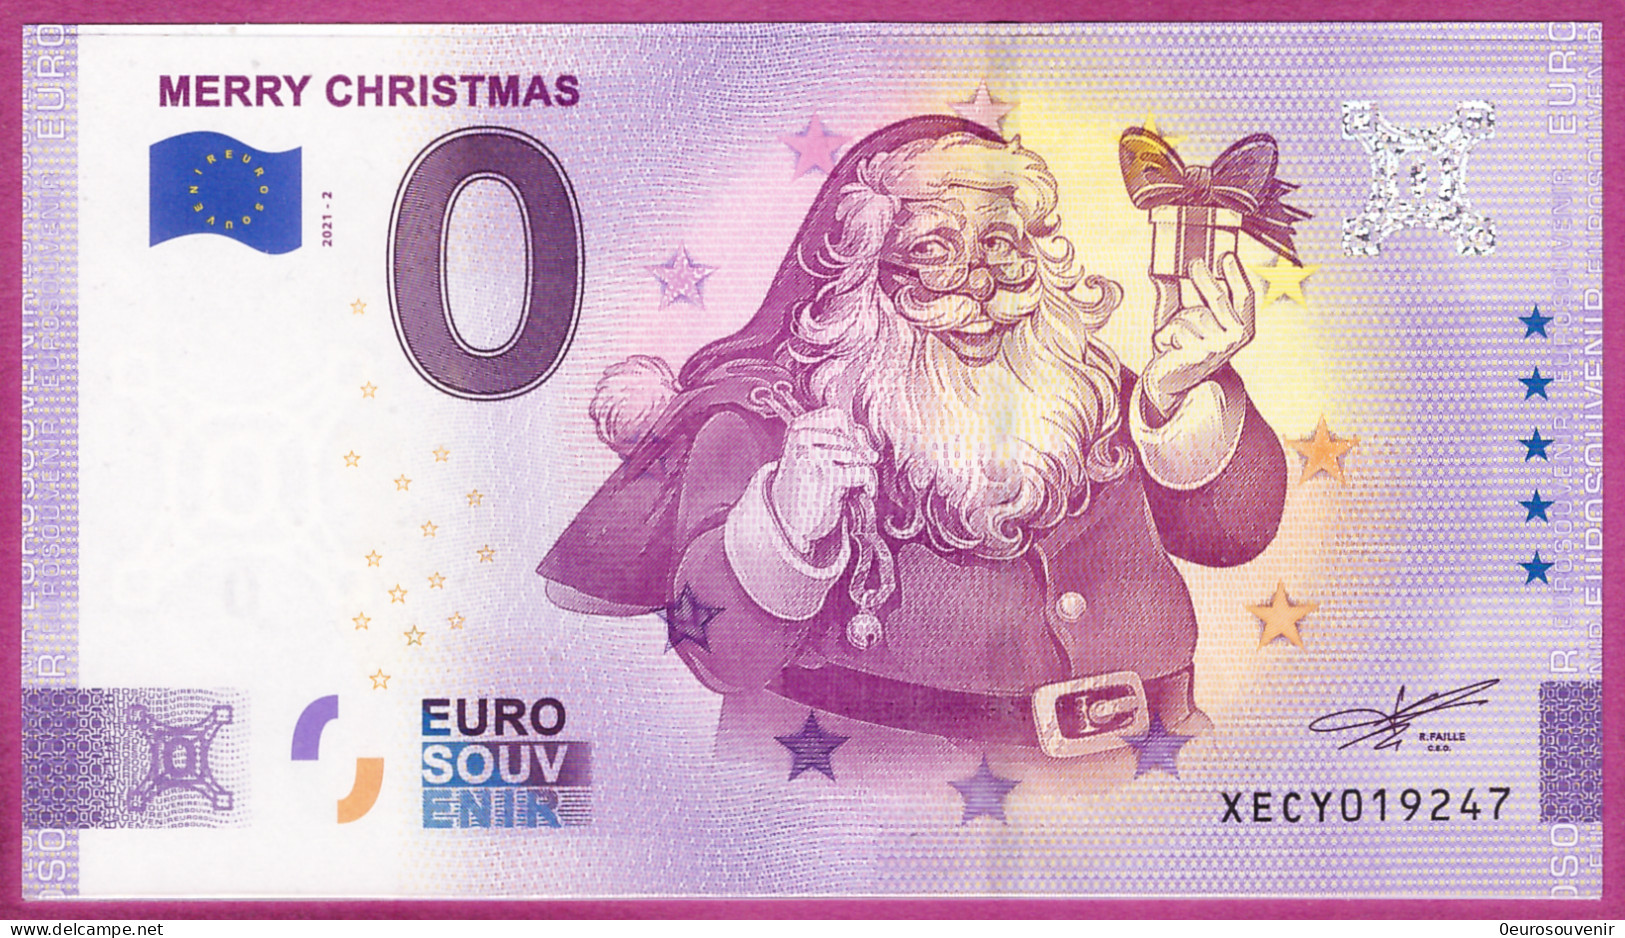 0-Euro XECY 2021-2 MERRY CHRISTMAS - FROHE WEIHNACHTEN - Privatentwürfe